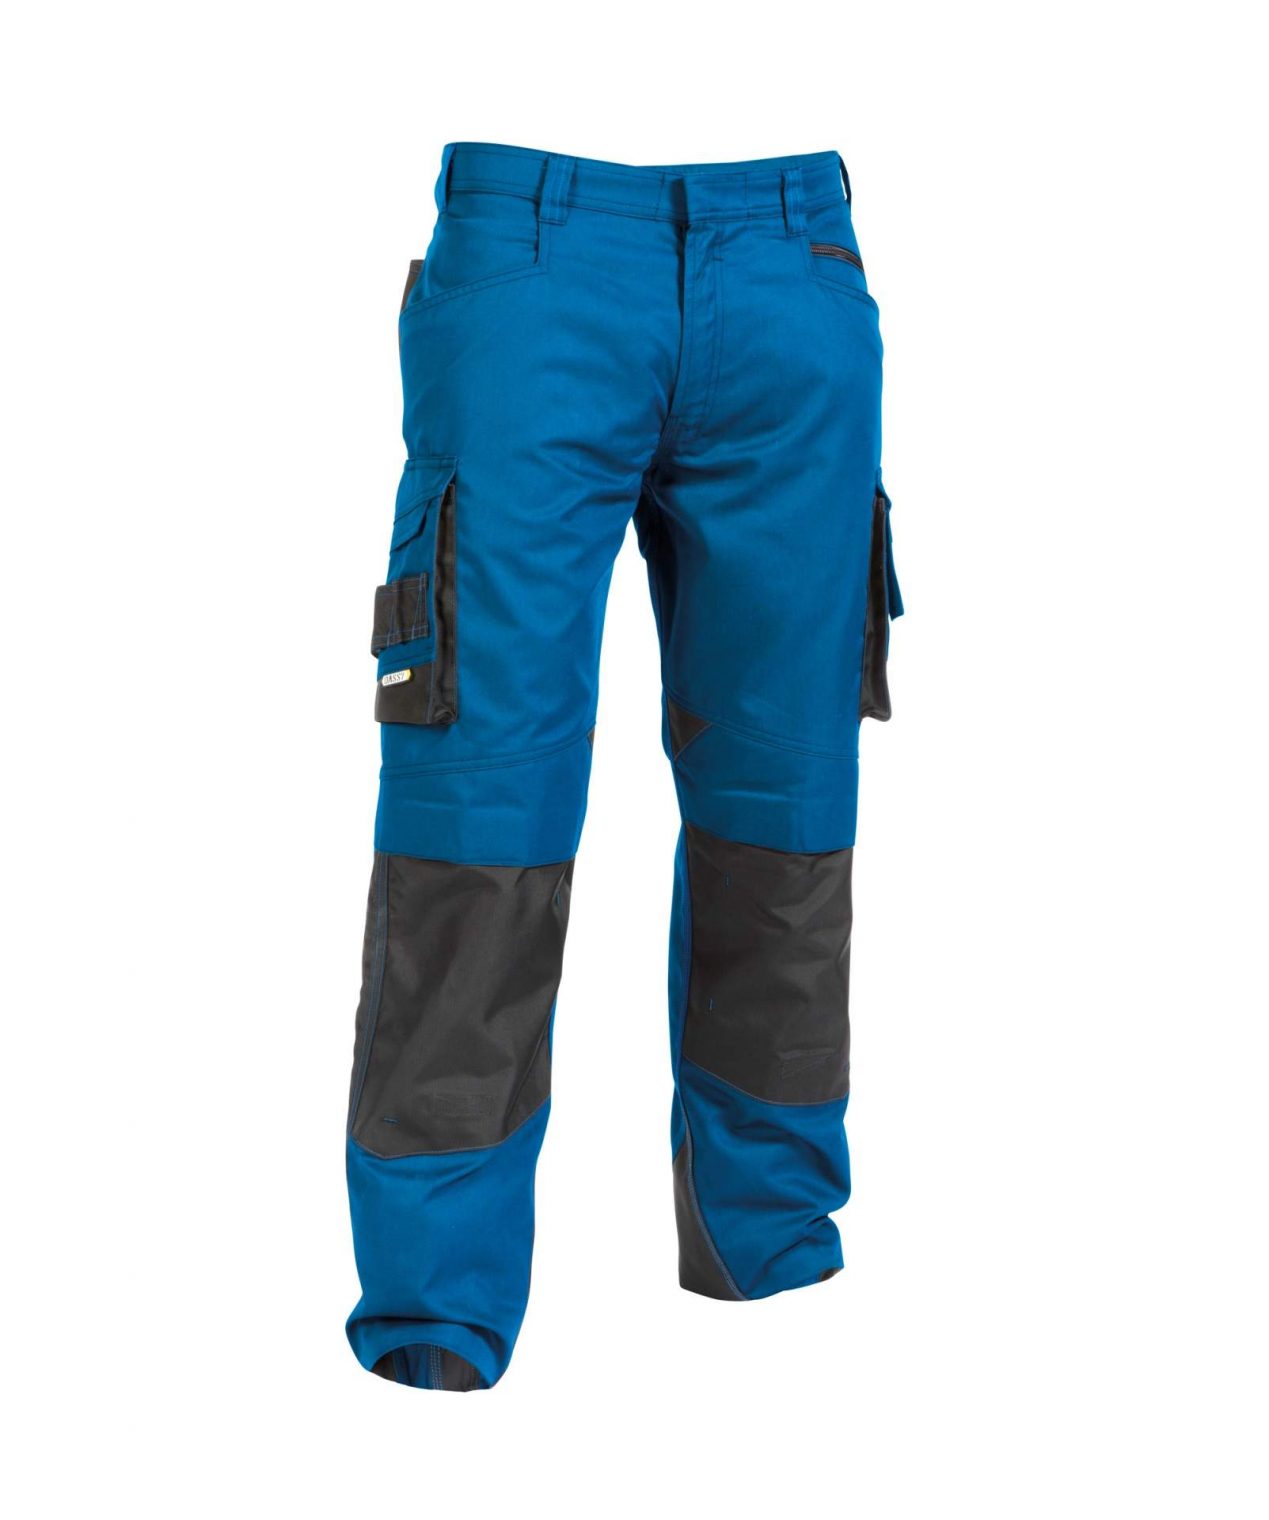 nova work trousers with knee pockets azure blue anthracite grey detail